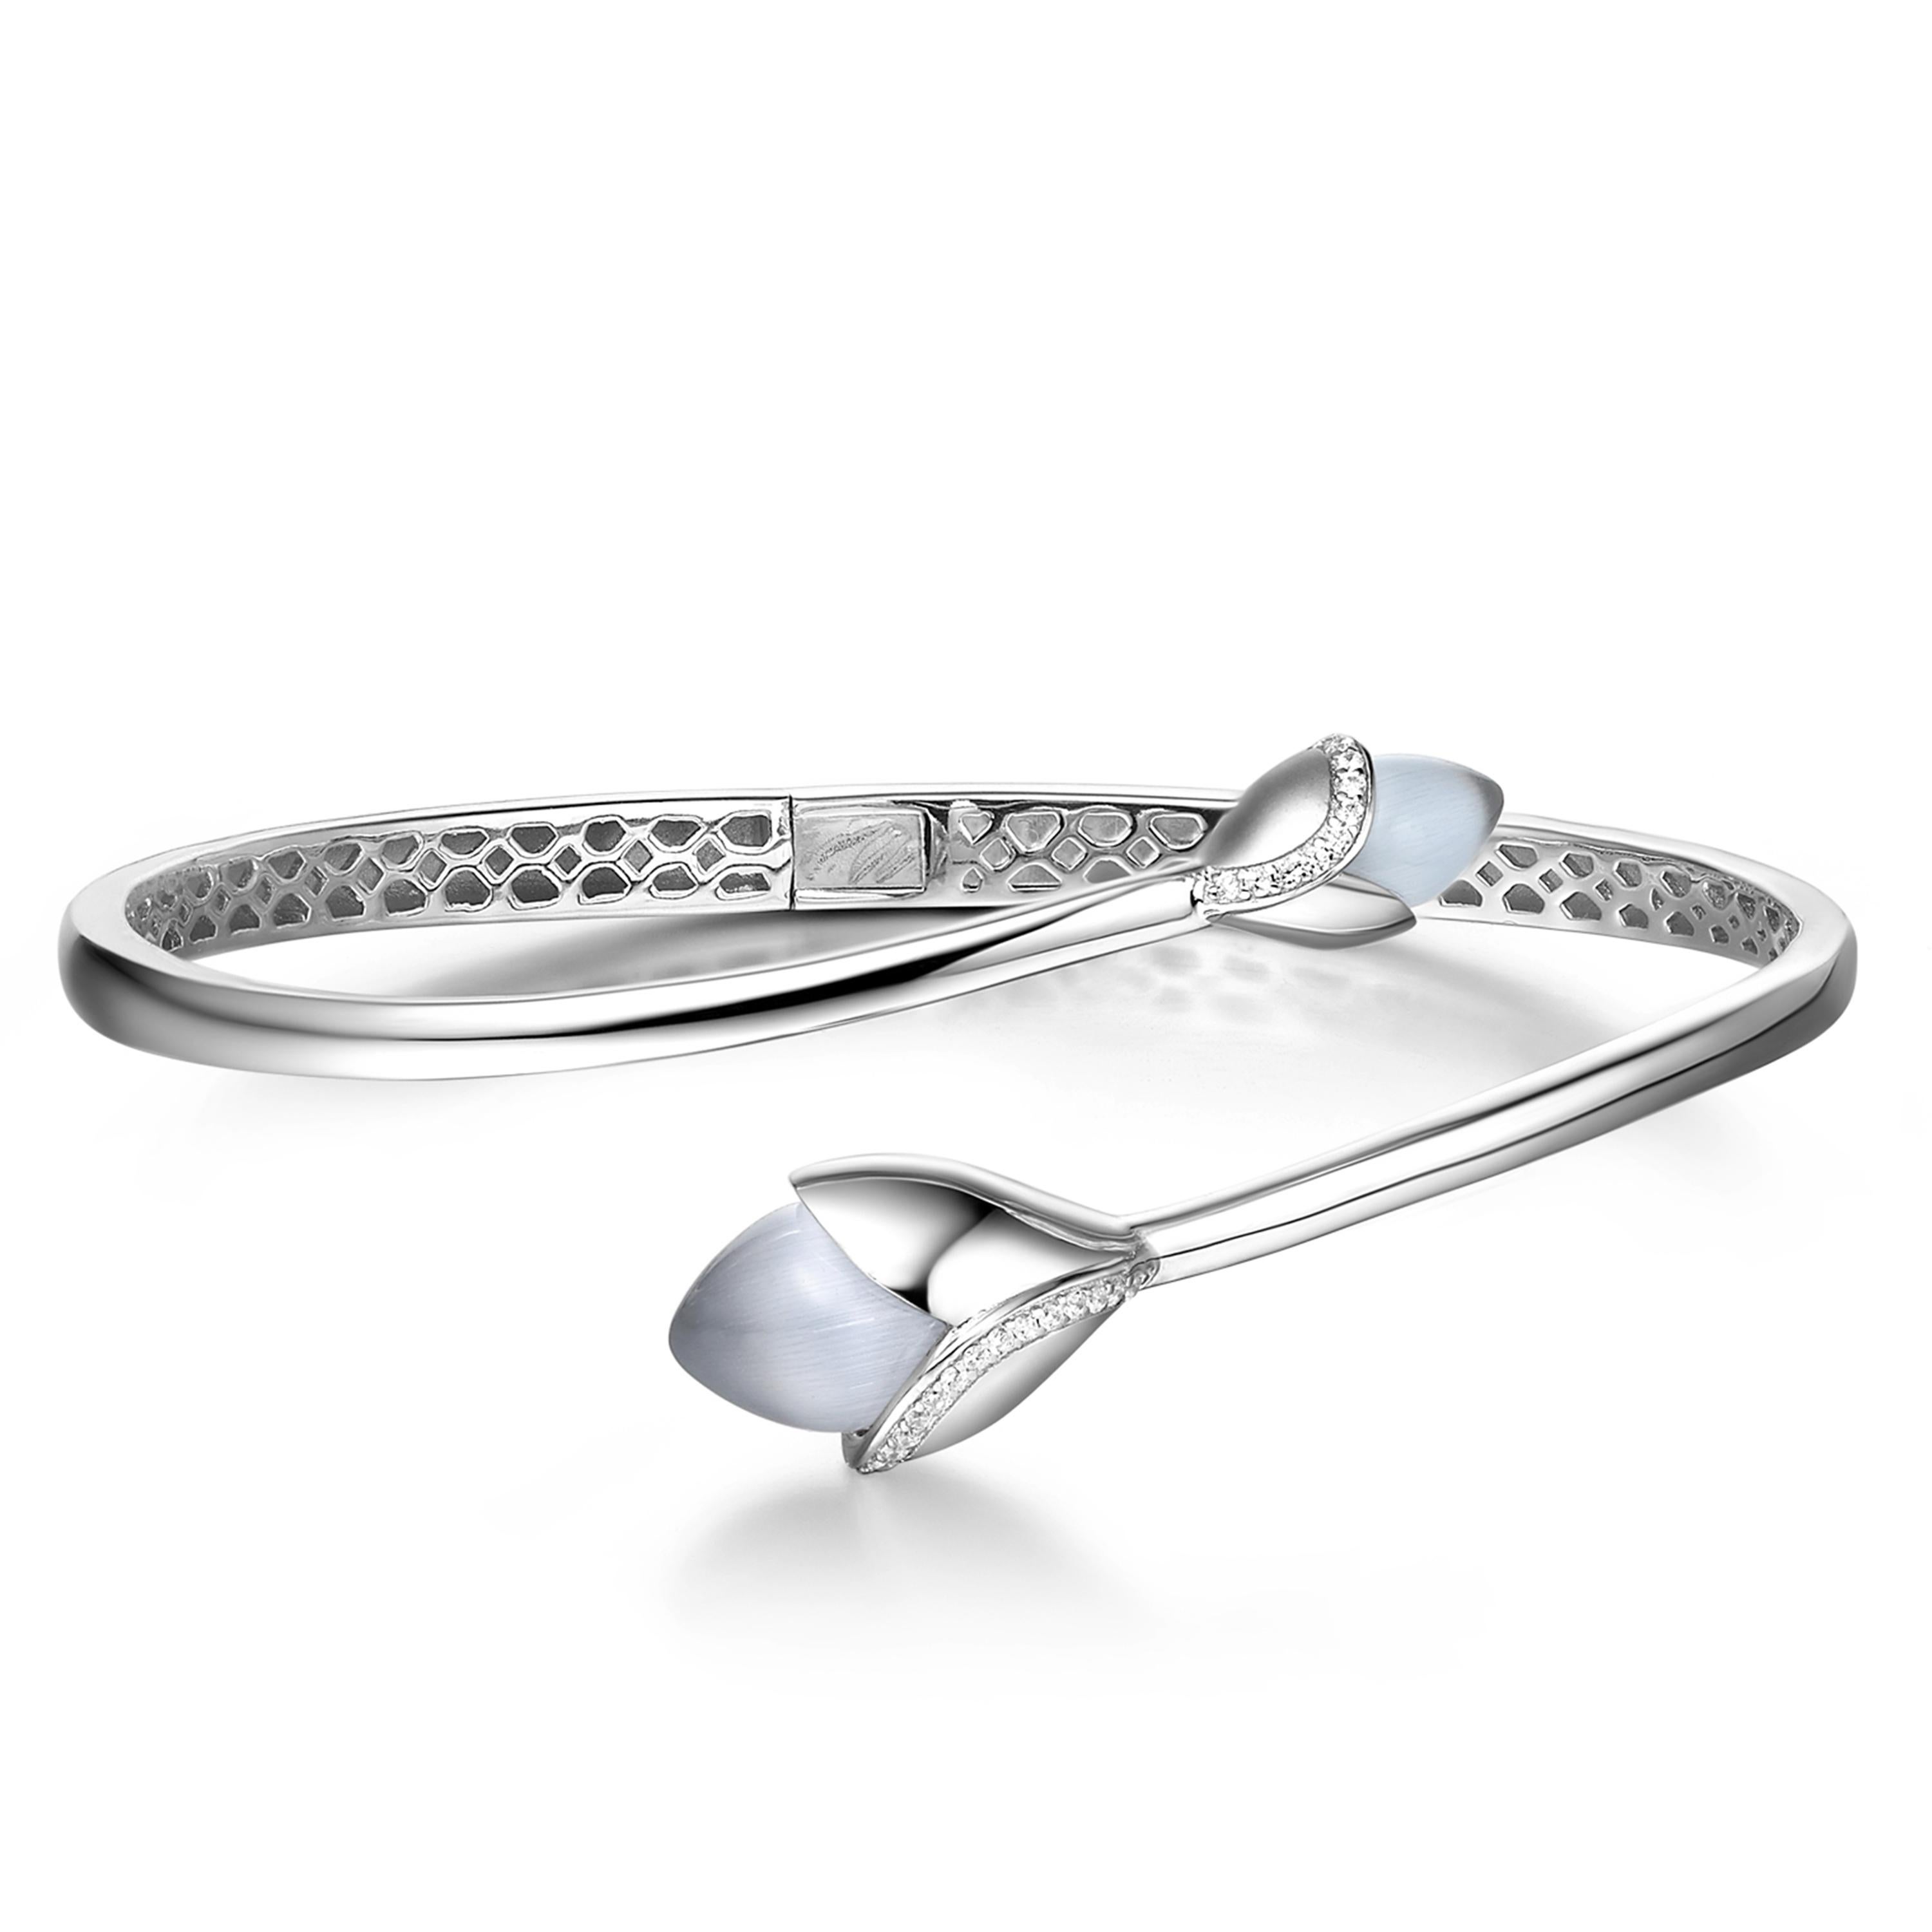 Description:
Blossom with the Magnolia bangle. Featuring two grey cat’s eye stone and cubic zirconia, set in white rhodium plate on sterling silver.

Inspiration:
This capsule collection blossoms with the pretty cat’s eyes and dew drops of 8 hearts